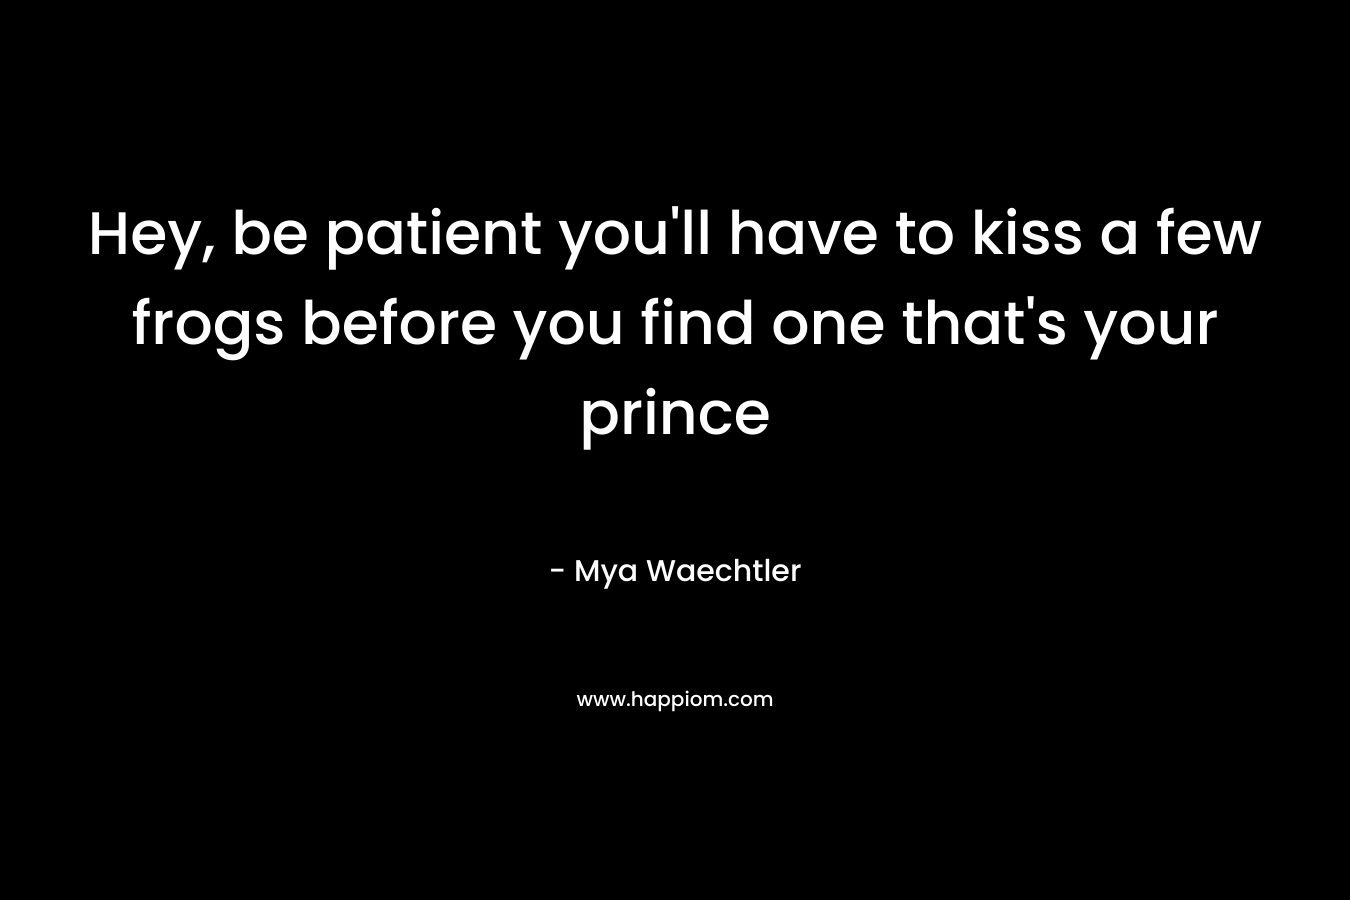 Hey, be patient you’ll have to kiss a few frogs before you find one that’s your prince – Mya Waechtler